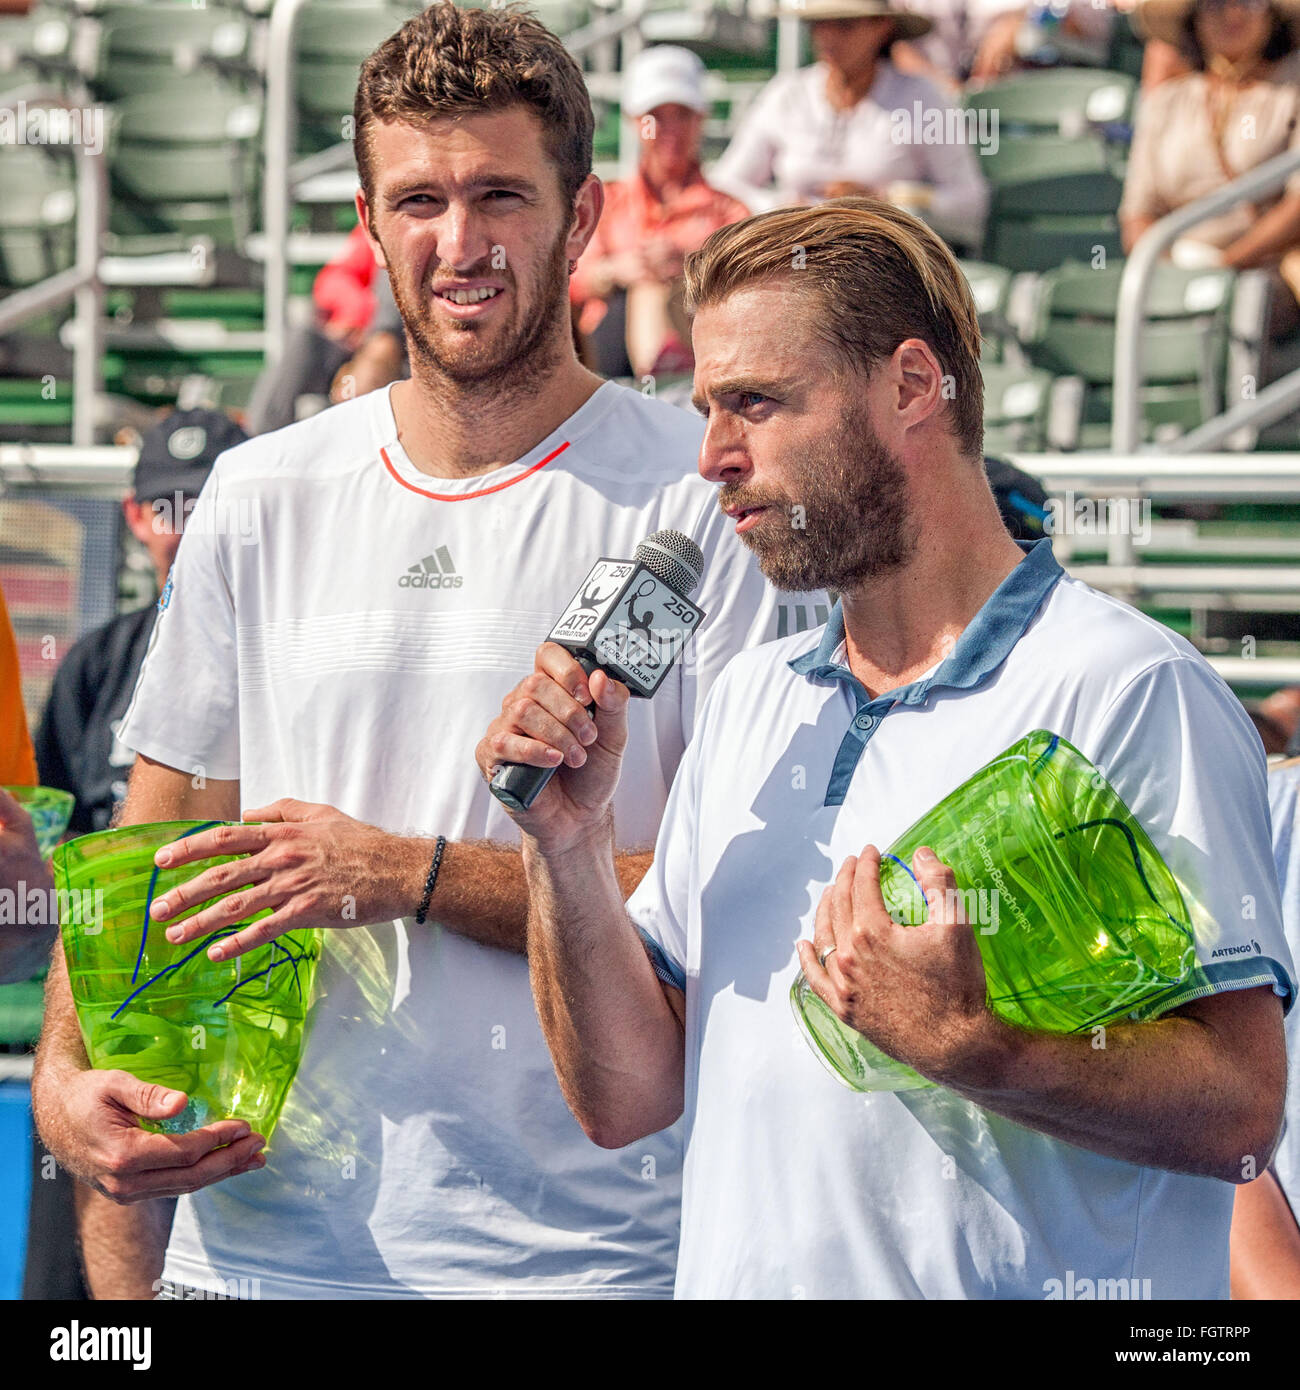 Delray Beach, Florida, US. 21st Feb, 2016. Holding their trophies, Frenchman FABRICE MARTIN speaks as his doubles partner Austrian OLIVER MARACH listens. They staged a dramatic comeback to beat the BRYAN BROTHERS in the doubles final, 3-6, 7-6(7) 13-11, at the ATP World Tour Delray Beach Open in Delray Beach, Florida © Arnold Drapkin/ZUMA Wire/Alamy Live News Stock Photo